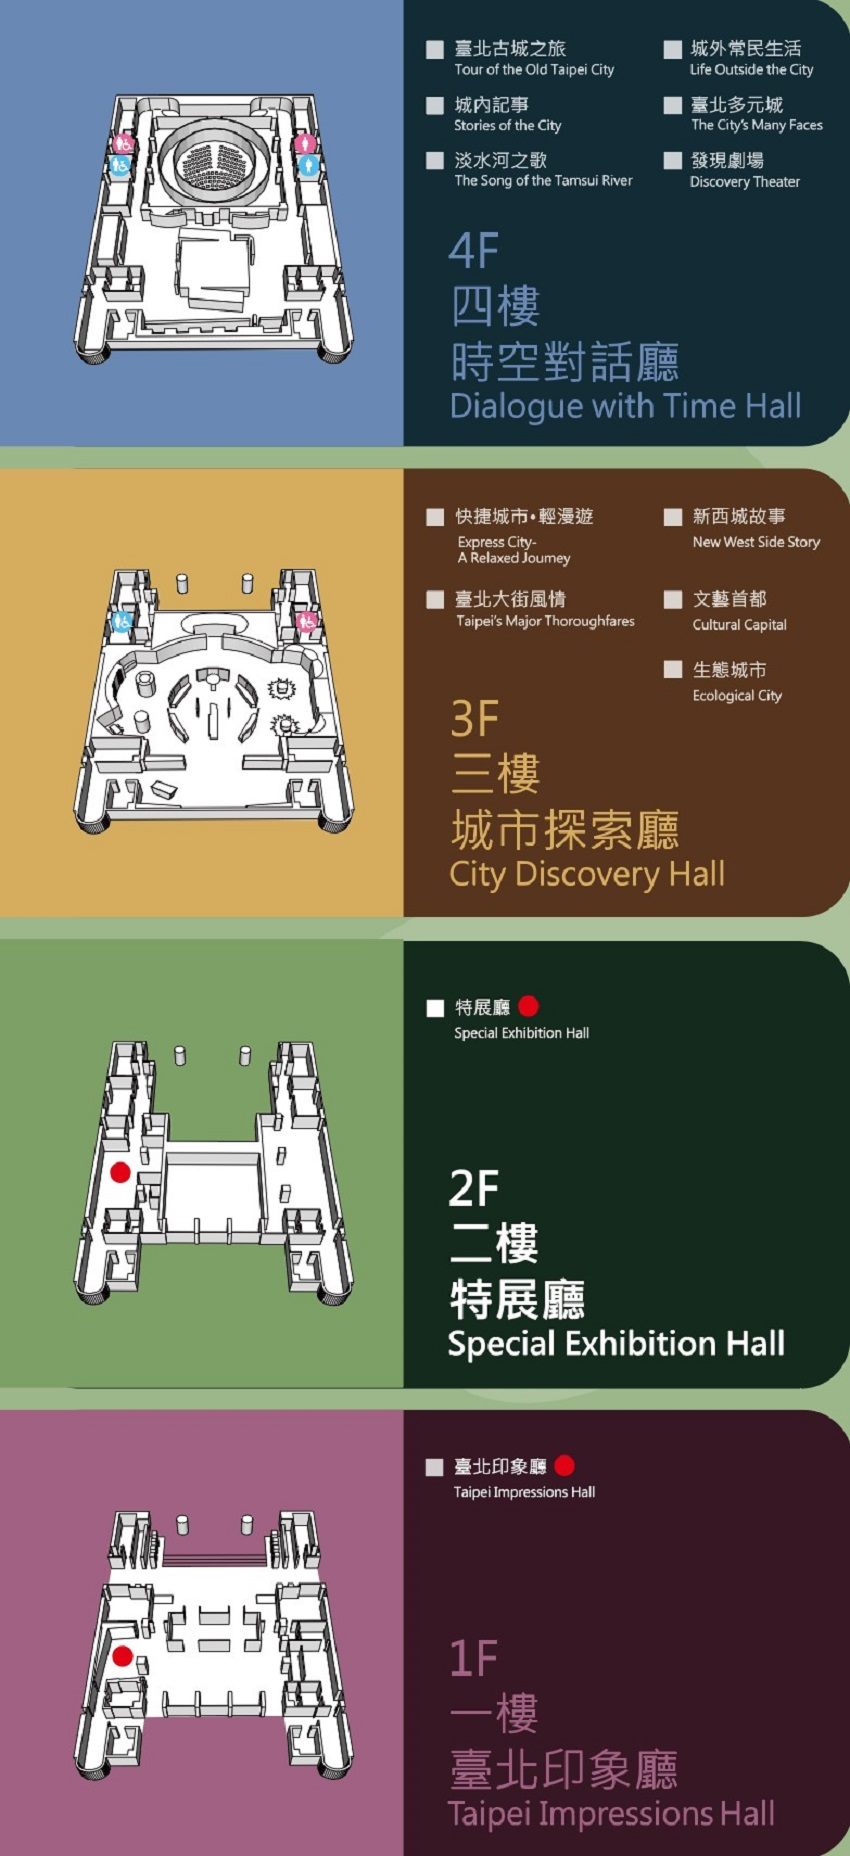 1F Taipei Impressions,2F Special Exhibition,3F City Discovery,4F Dialogue with Time